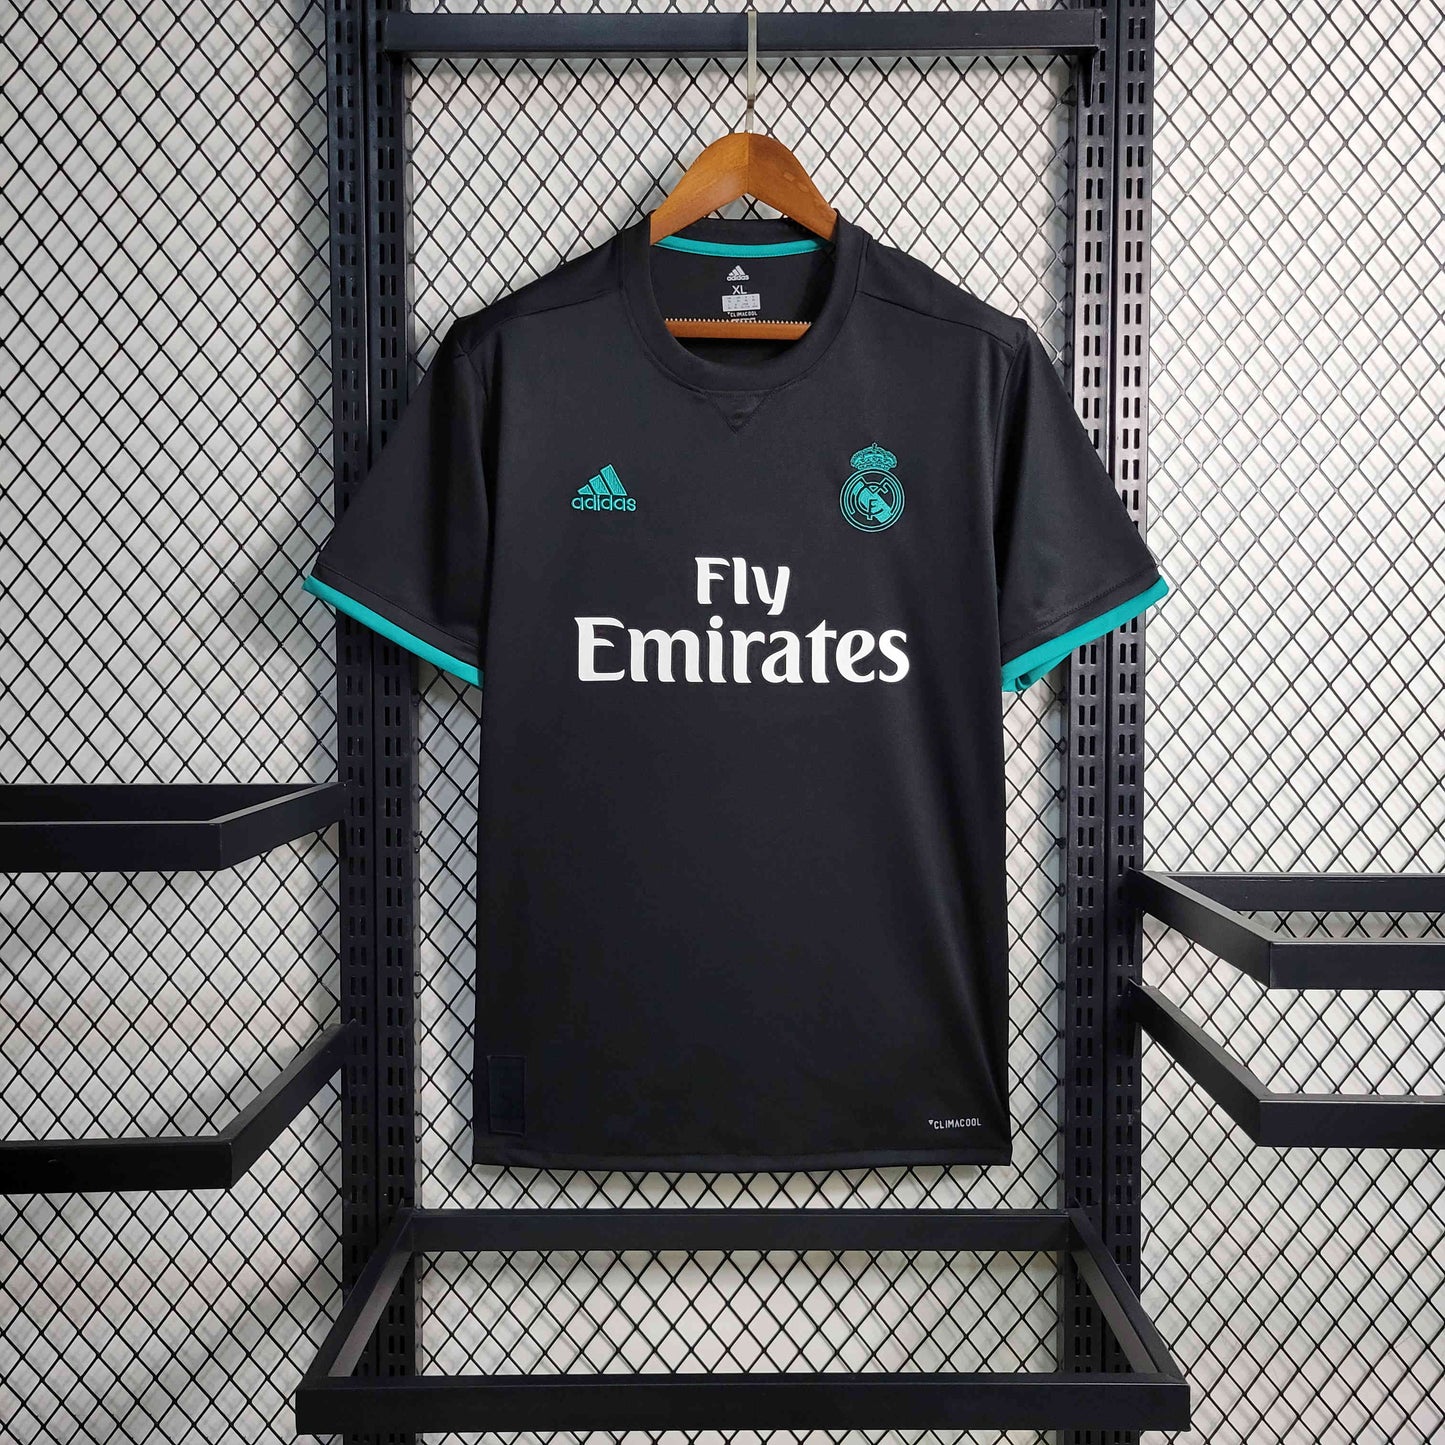 MAILLOT DE FOOTBALL EXTÉRIEUR REAL MADRID 2017/2018 ADIDAS TAILLE S ADULTE